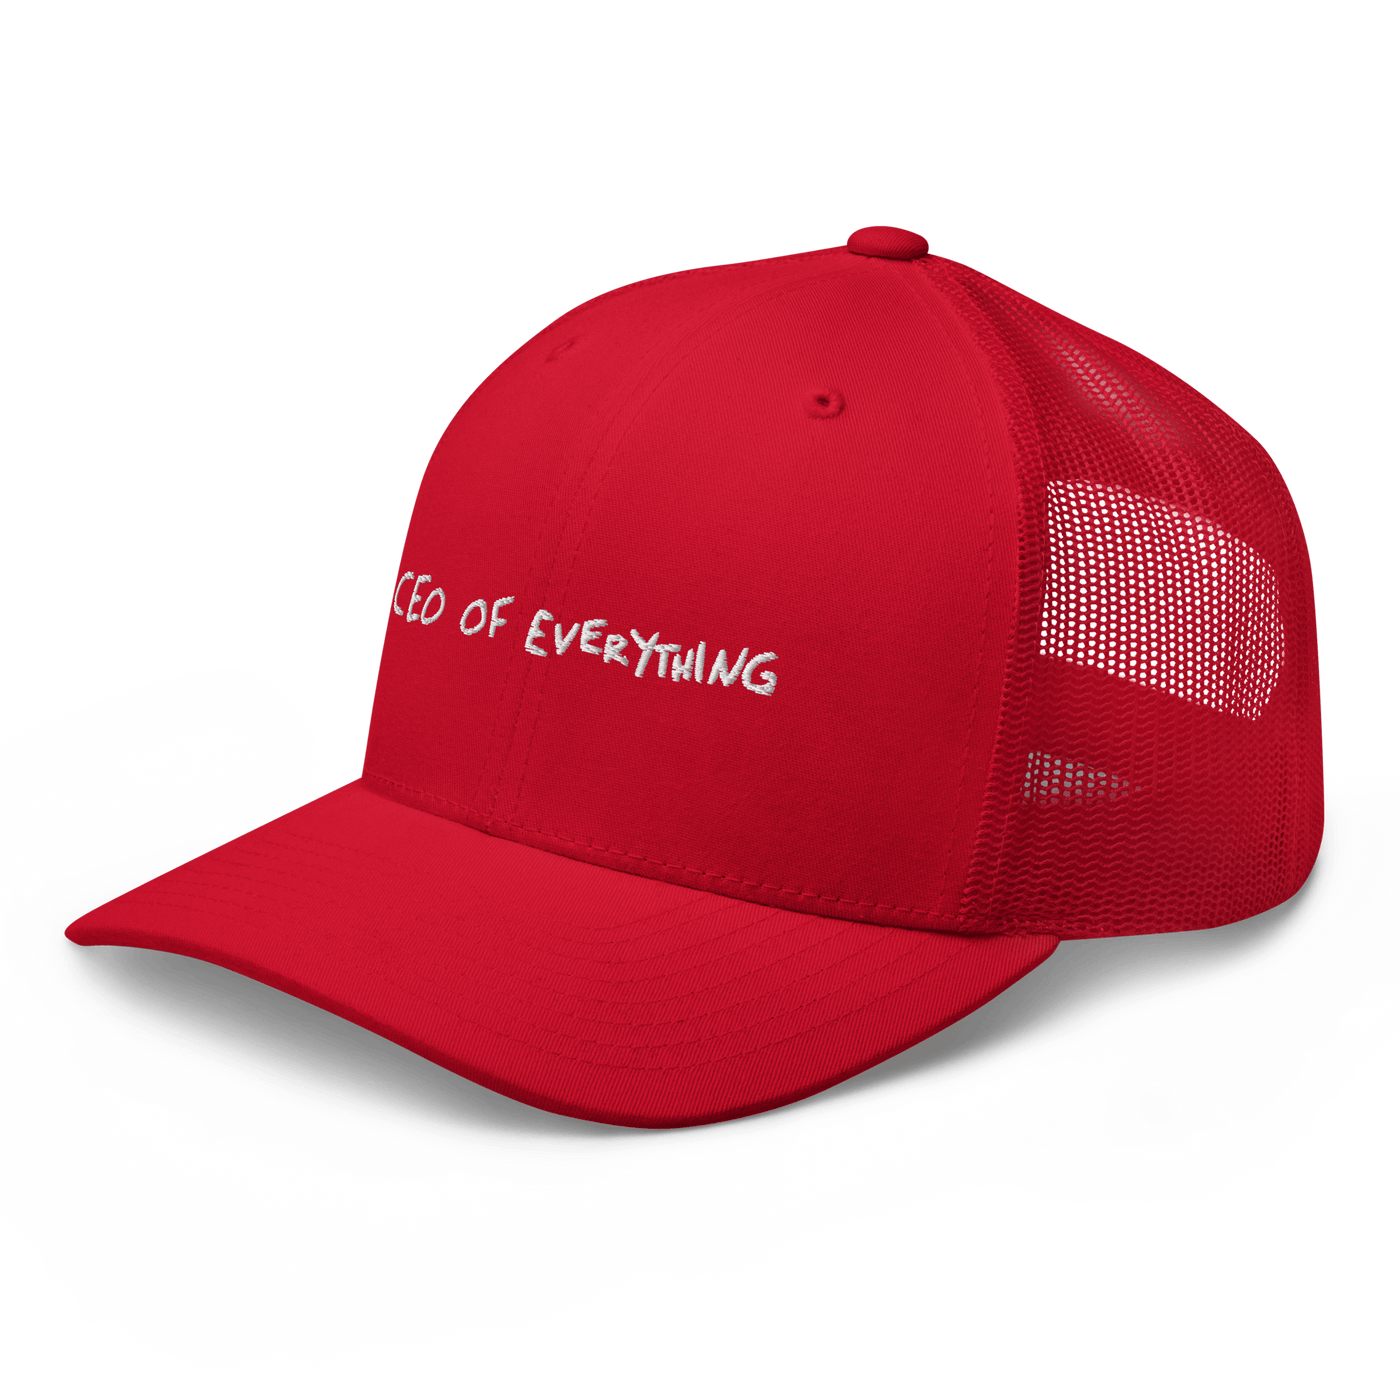 CEO of everything Trucker Cap - Red - - Just Another Cap Store